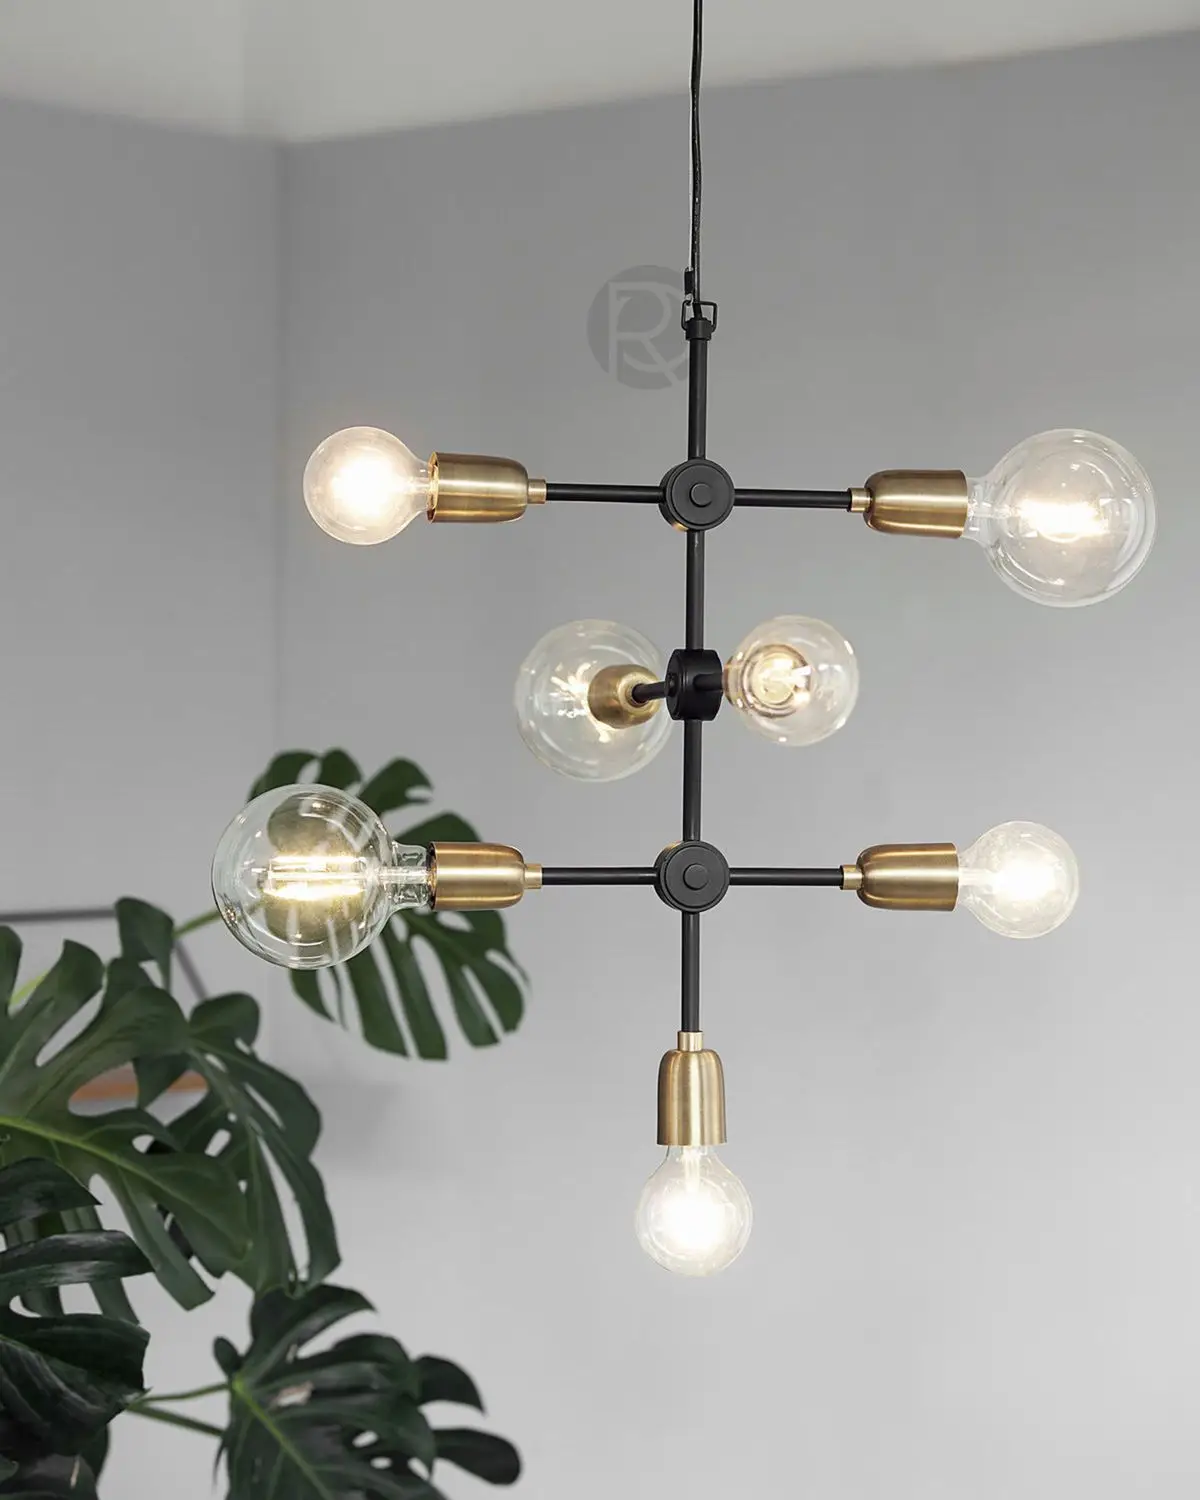 Pendant lamp MOLECULAR by House Doctor